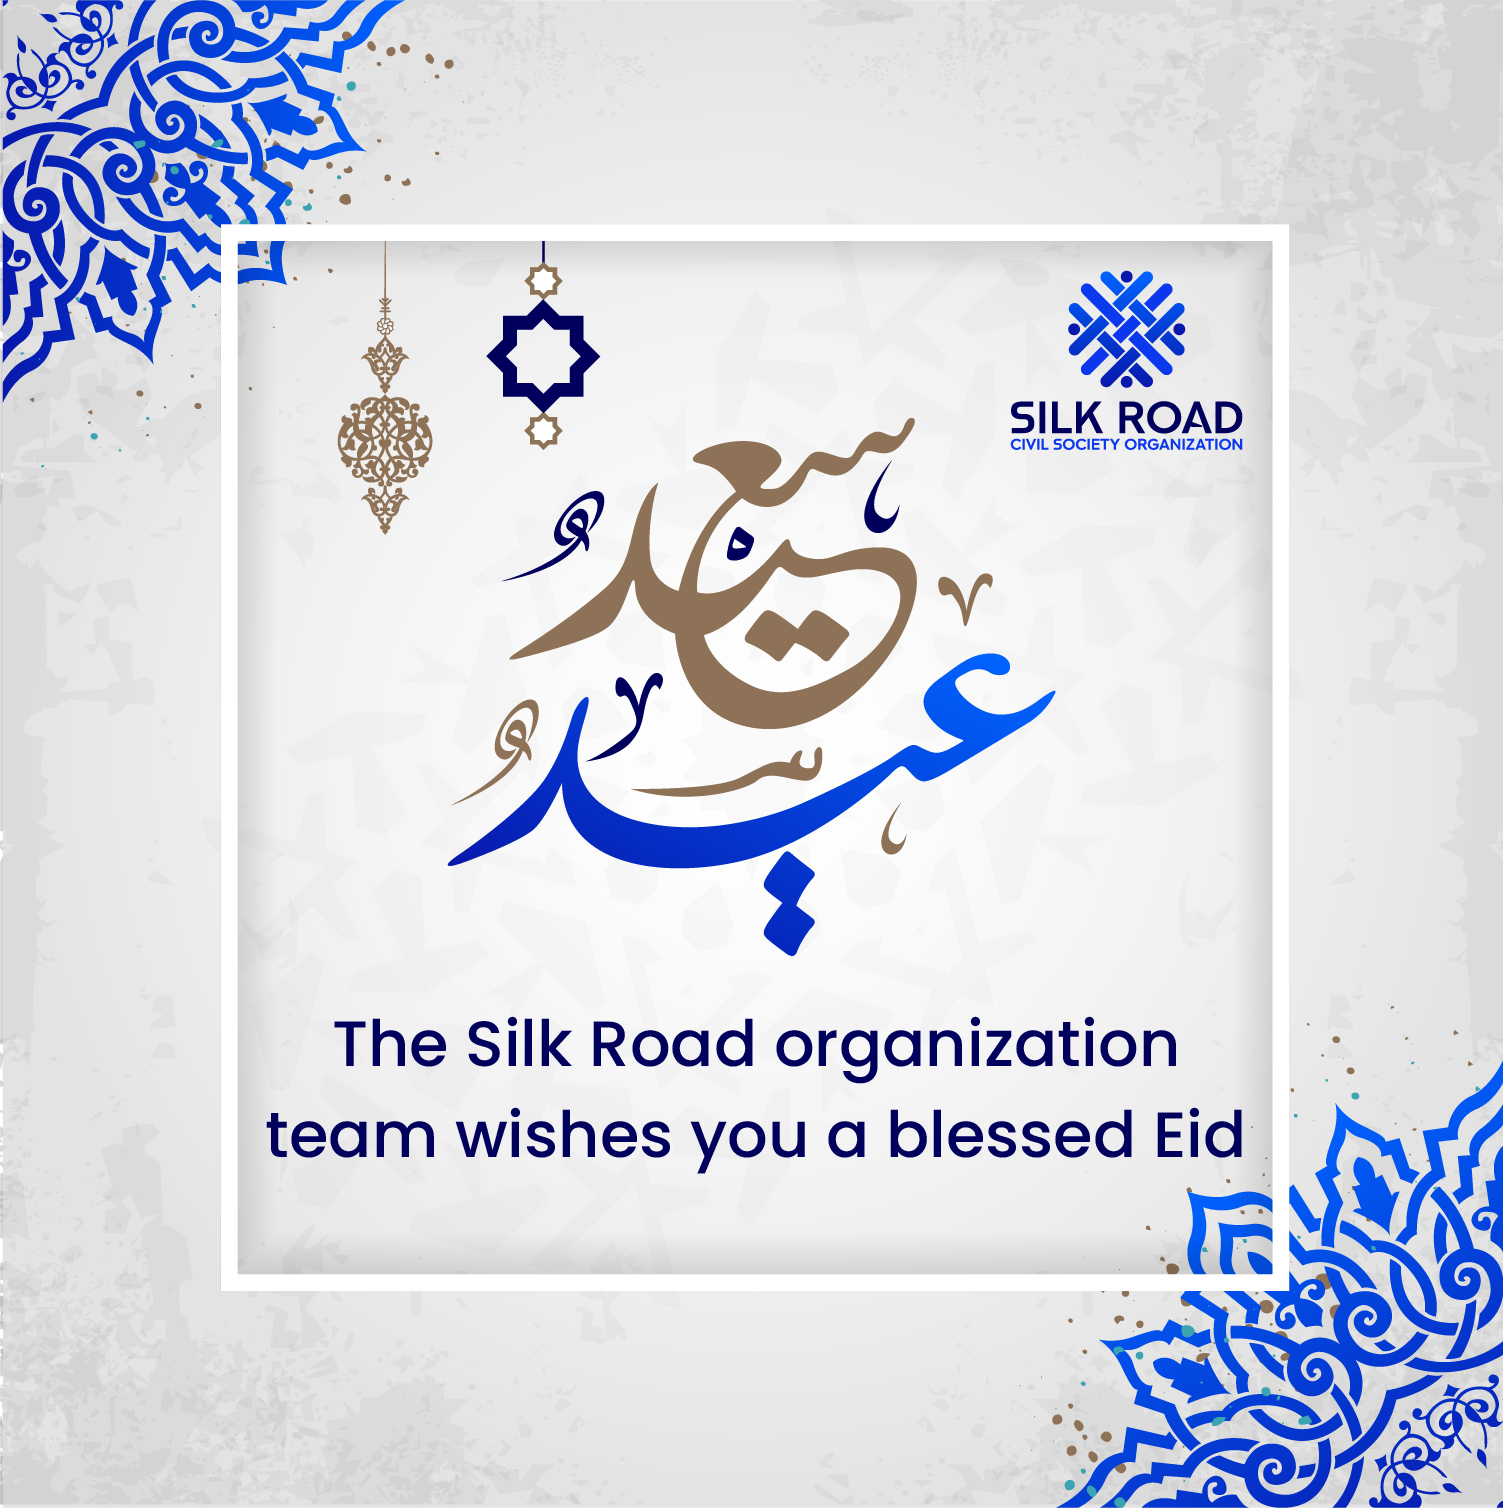 The Silk Road organization team wishes you a blessed Eid